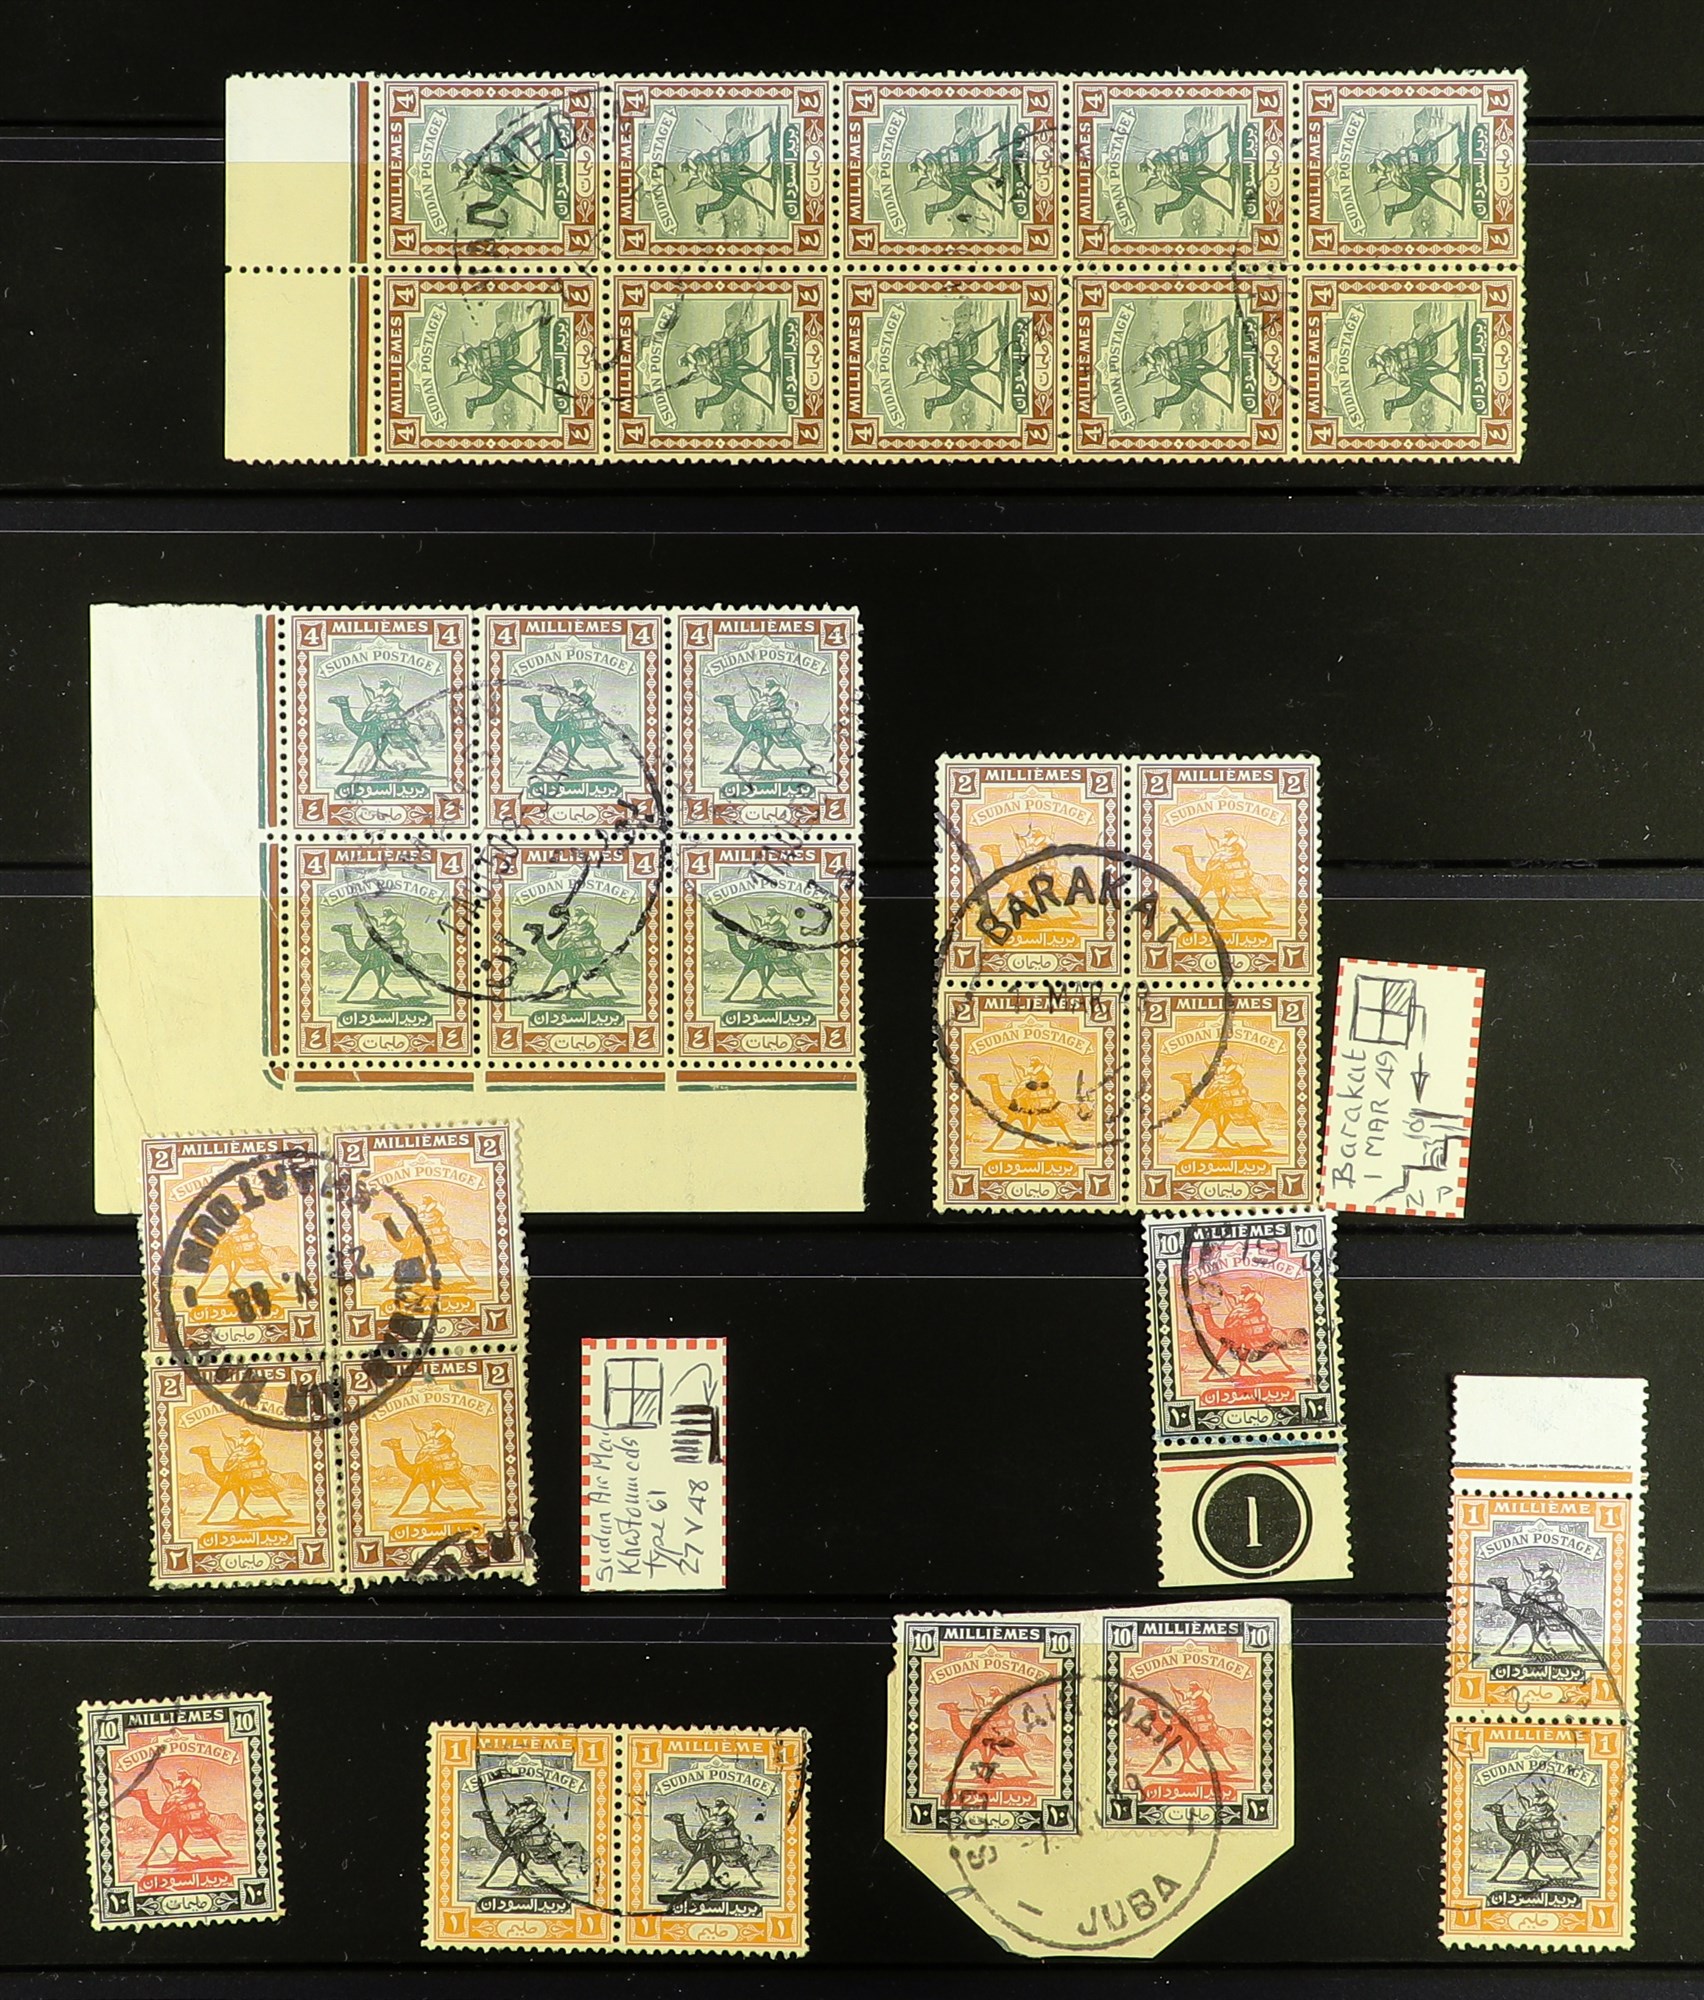 SUDAN 1898 - 1954 SPECIALISED USED RANGES IN 5 ALBUMS. Around 12,000 used stamps with many - Image 23 of 41